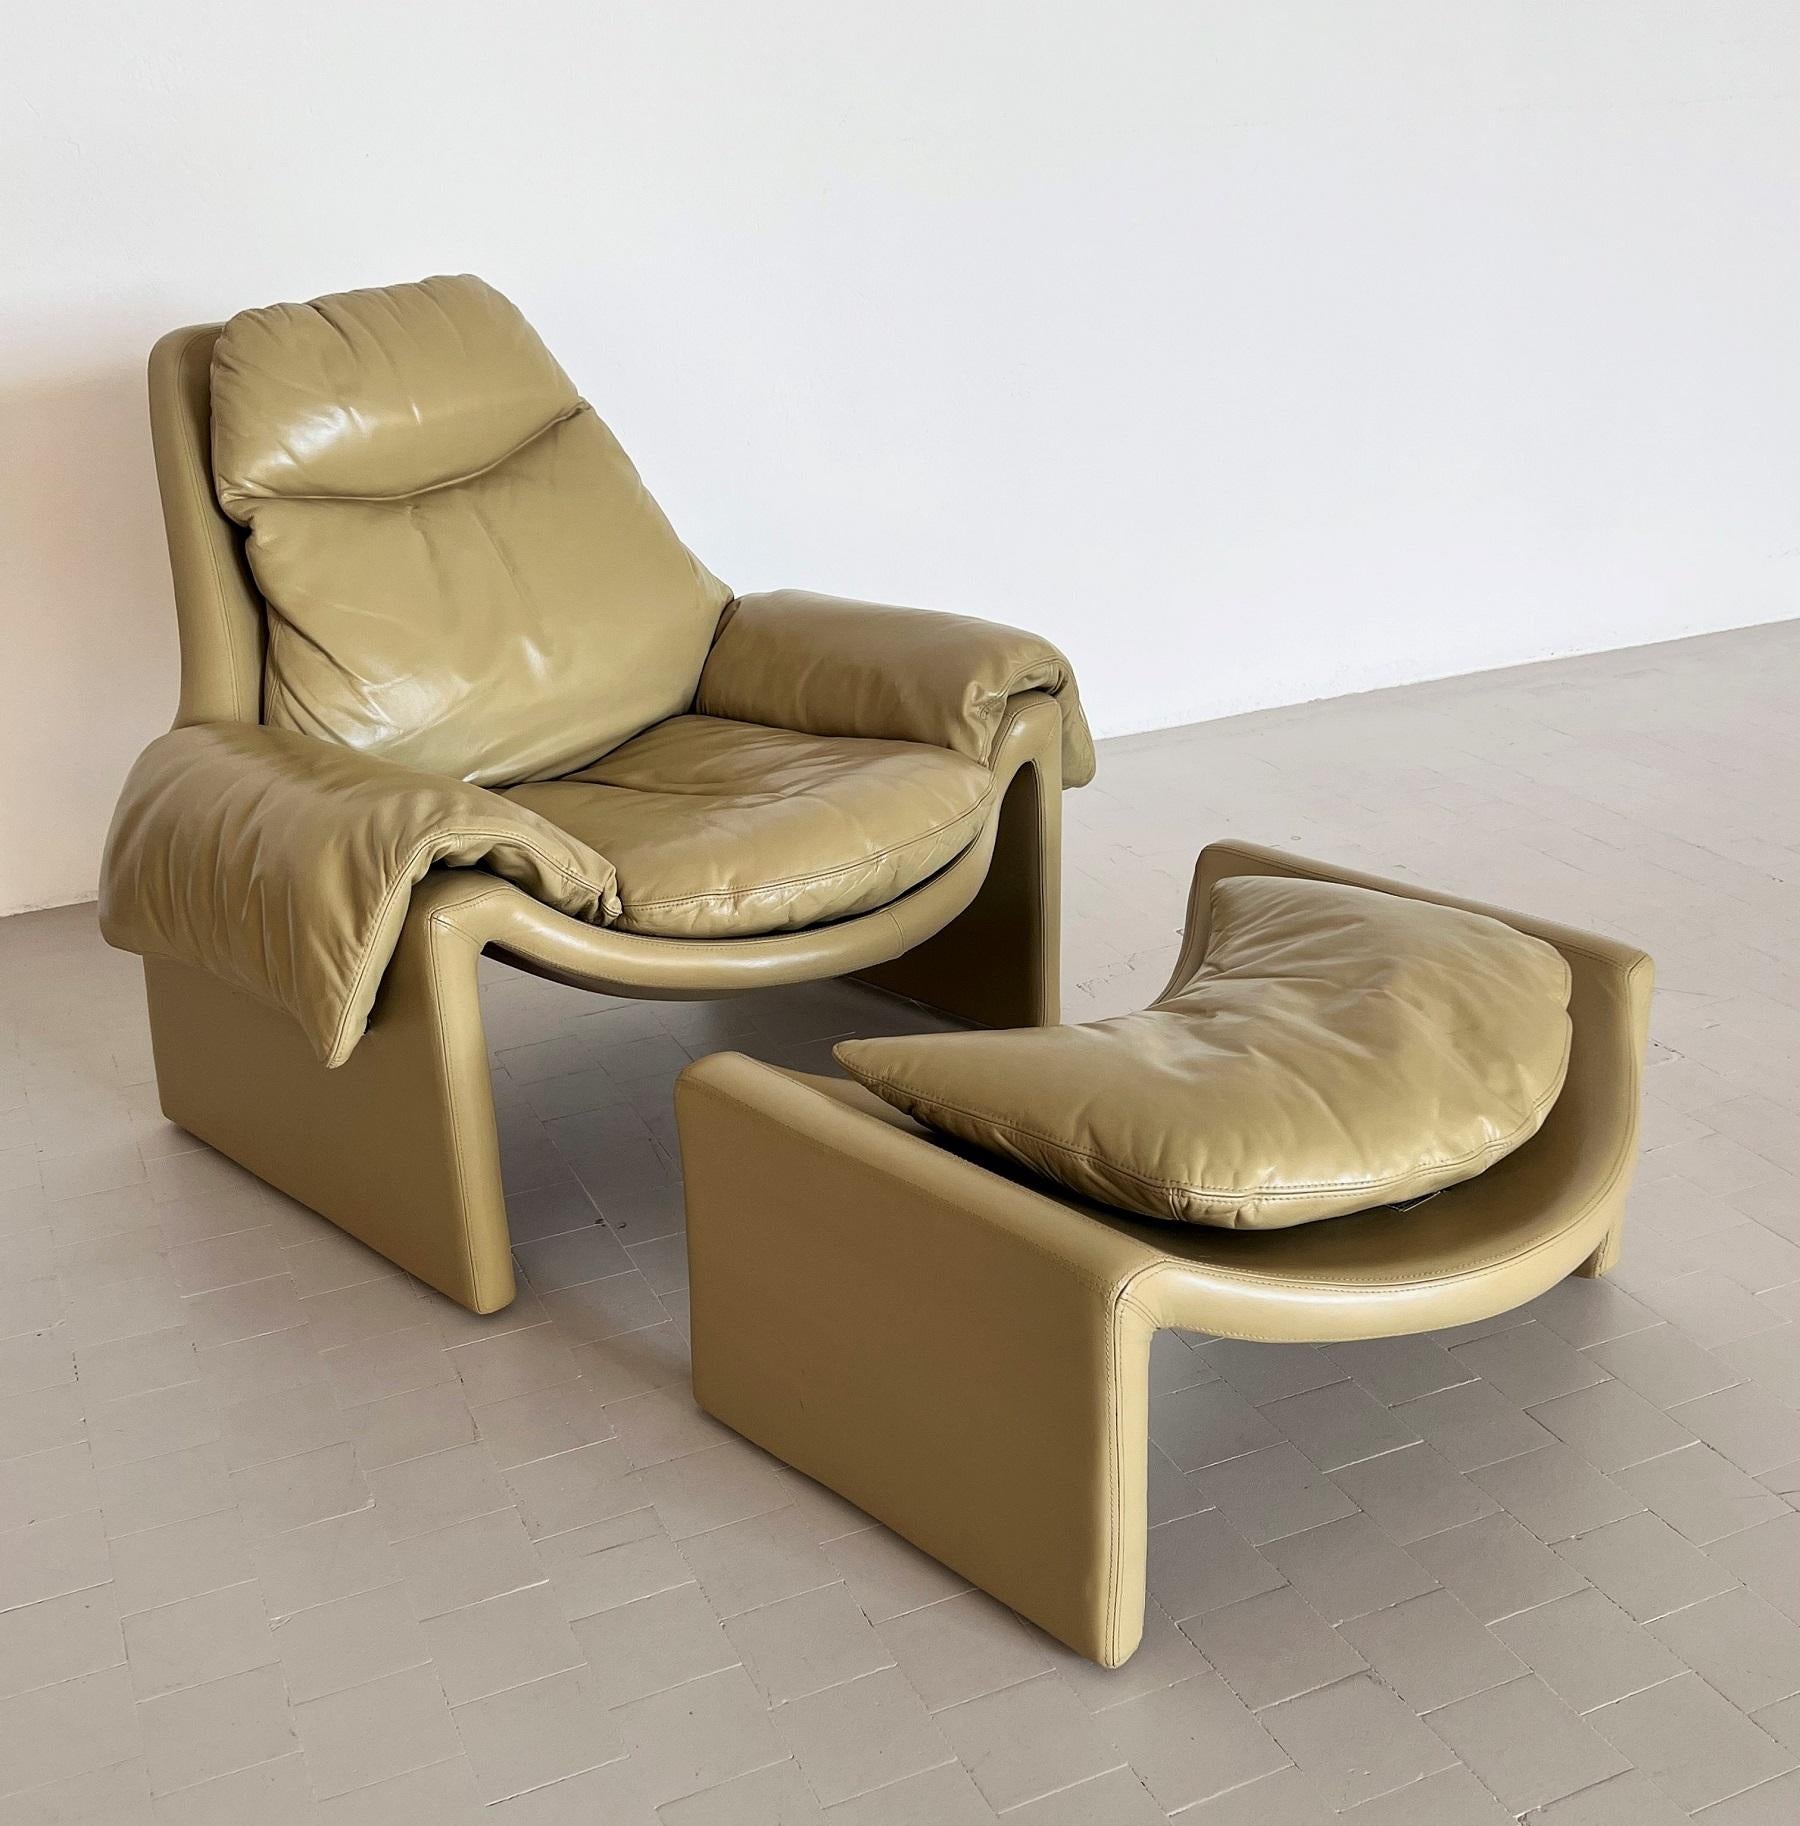 A beautiful and very comfortable set of armchair with saddle effect and matching footstool, which takes the curves of the armchair.
The set has its original pistachio color very smooth leather upholstery. 
Designed circa 1962 by Vittorio Introini